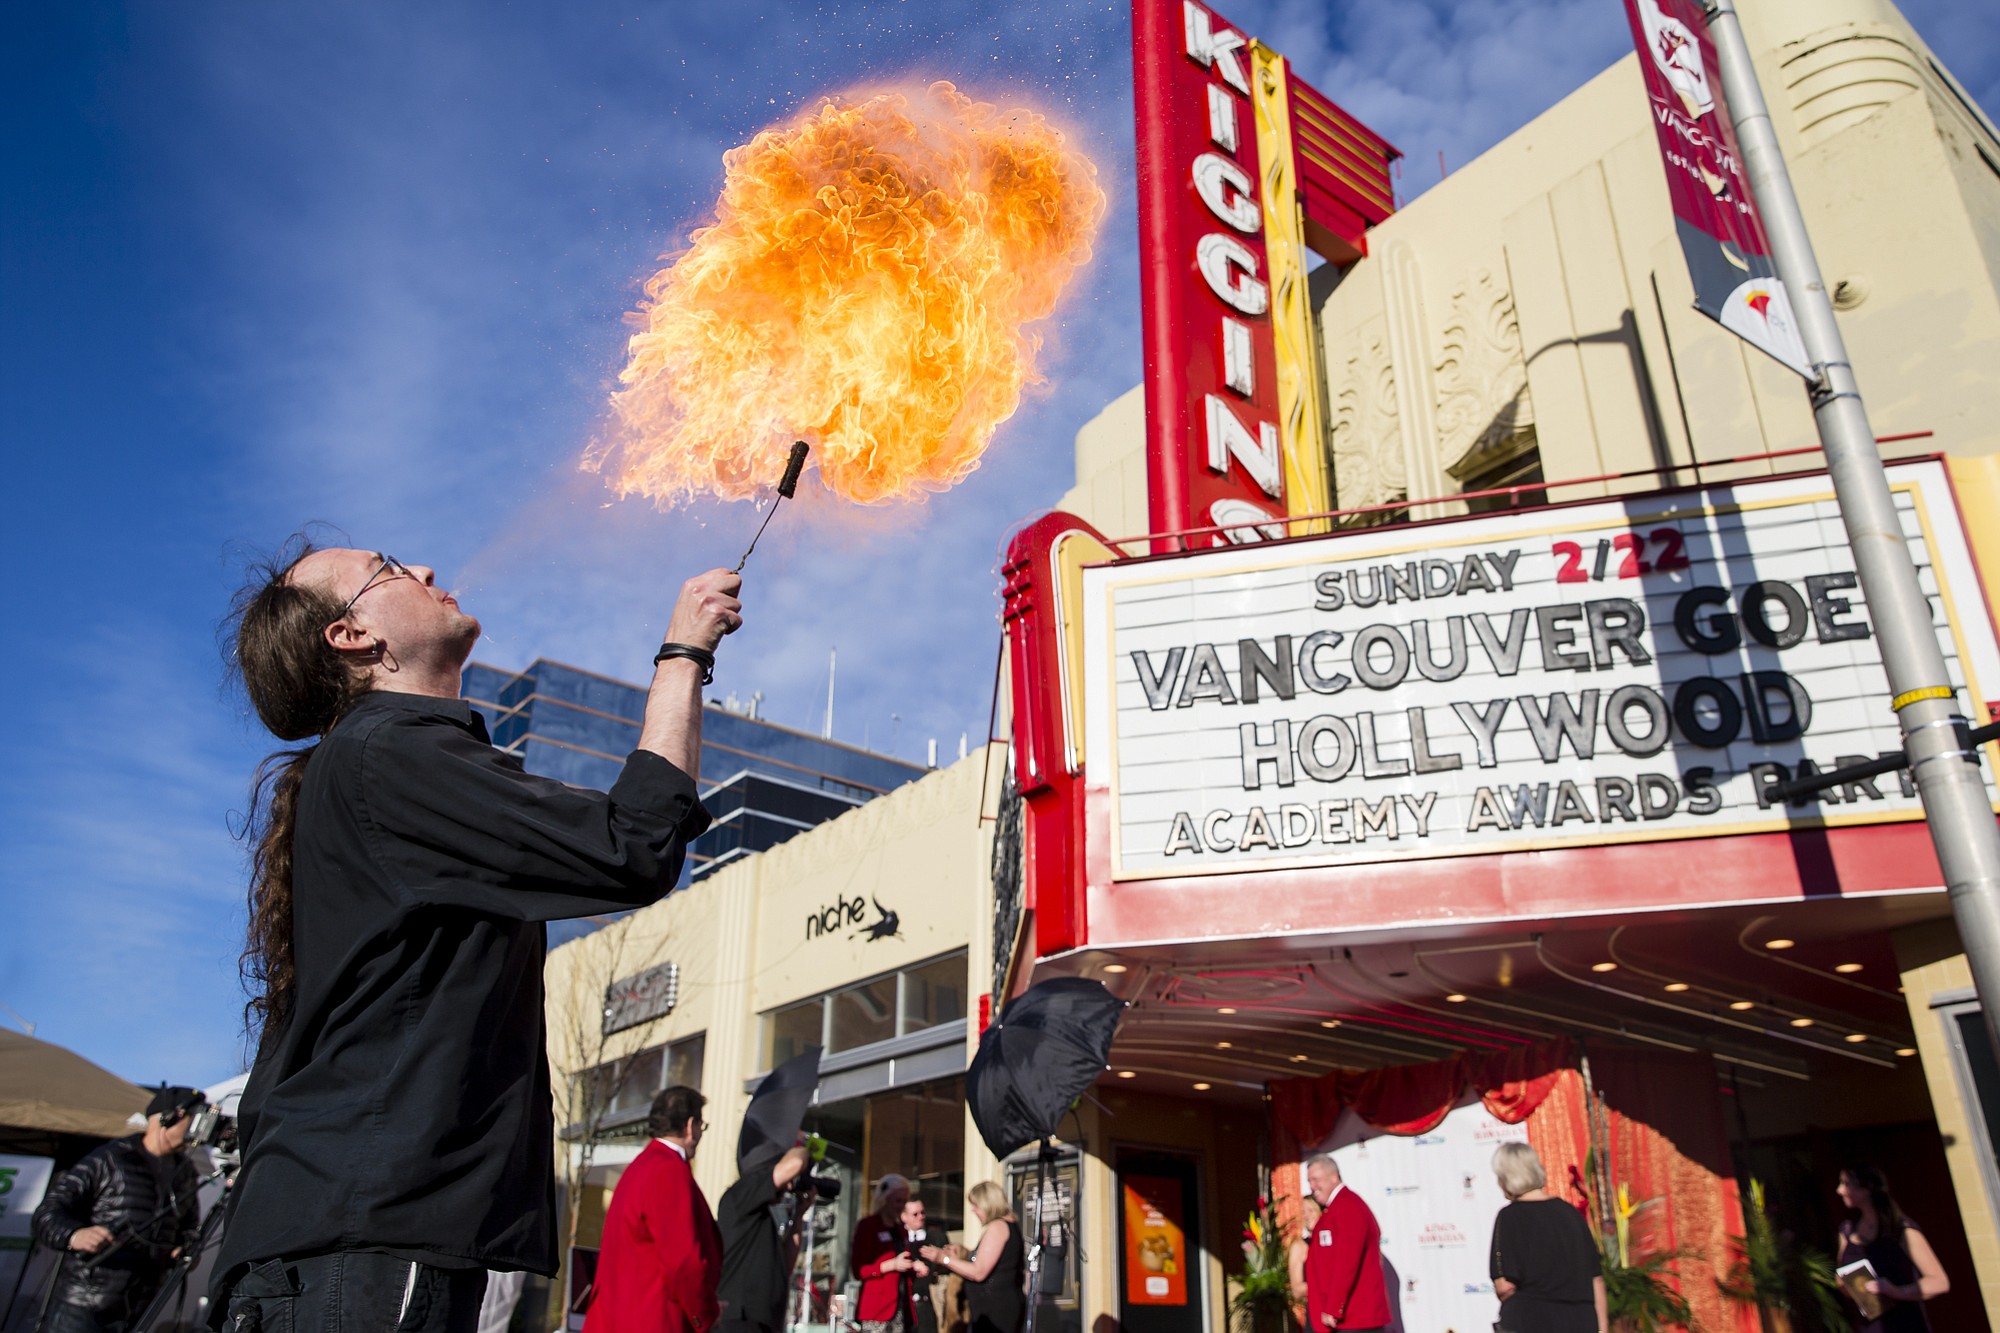 Fire breather Ian Roy performs Sunday as guests arrive at the Kiggins Theatre for Vancouver Goes Hollywood.